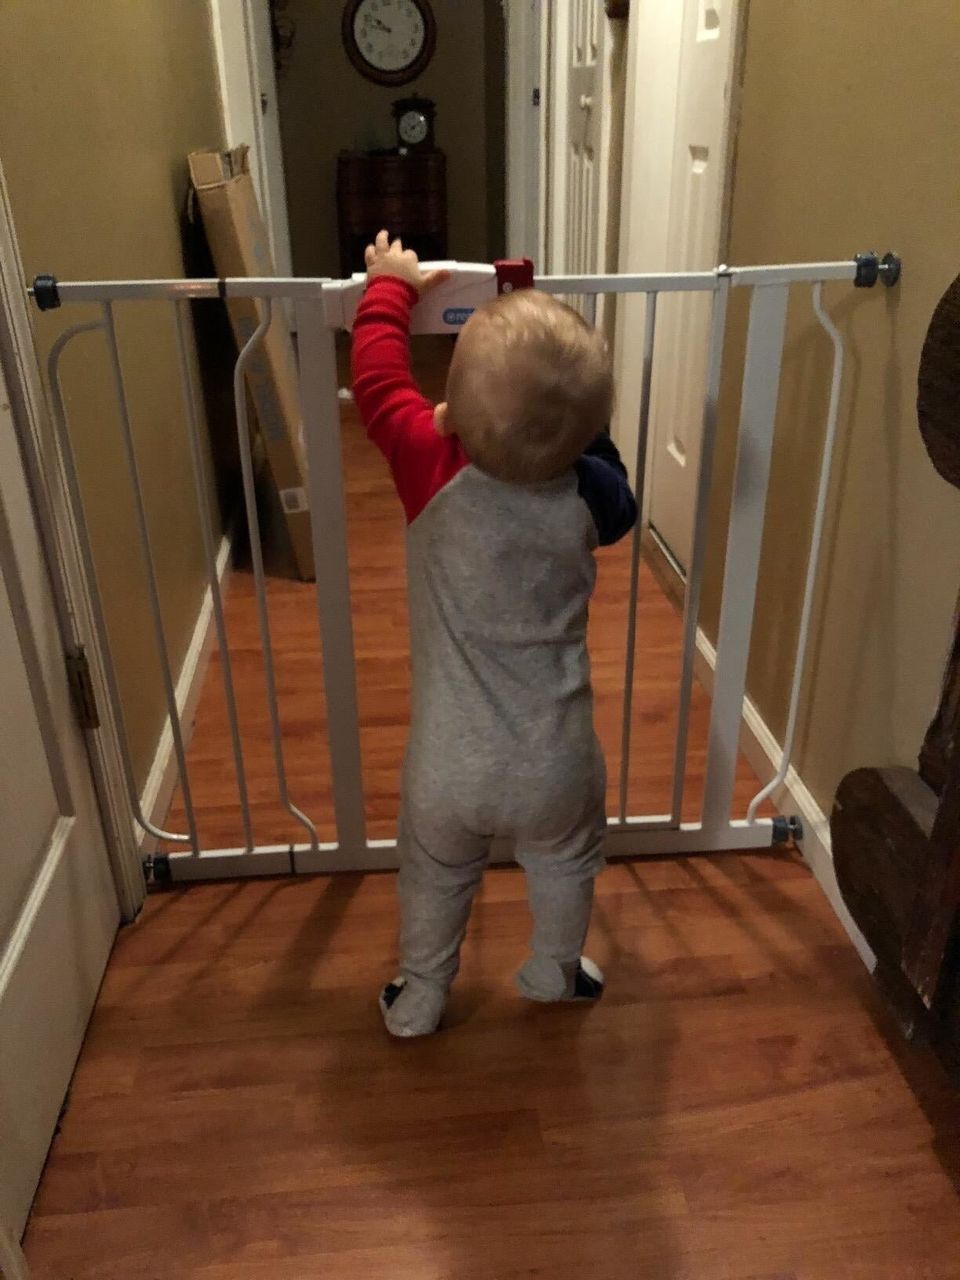 An inexpensive but quality baby gate